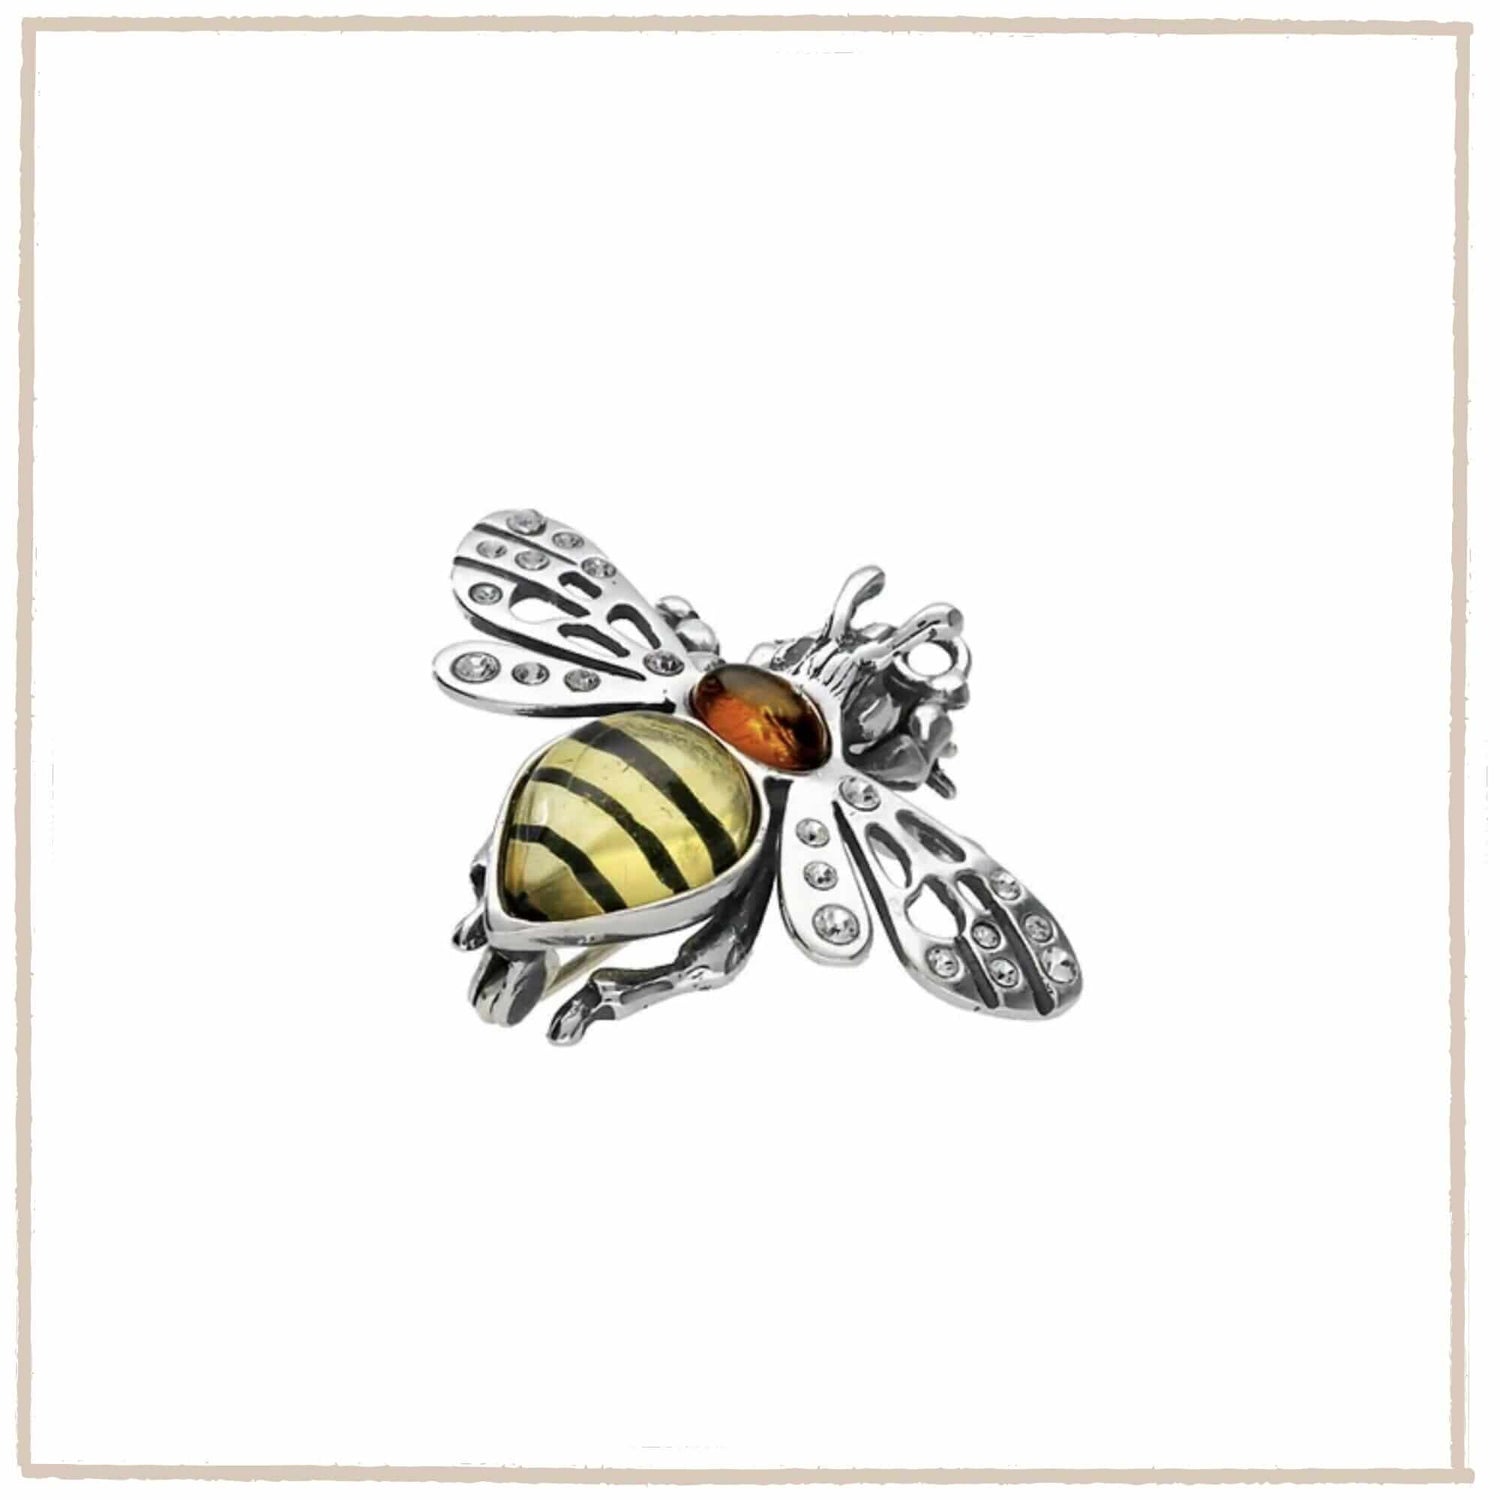 Brooches & Pins & 925 sterling silver jewellery collections at Twelve Silver Trees Jewellery & Gifts